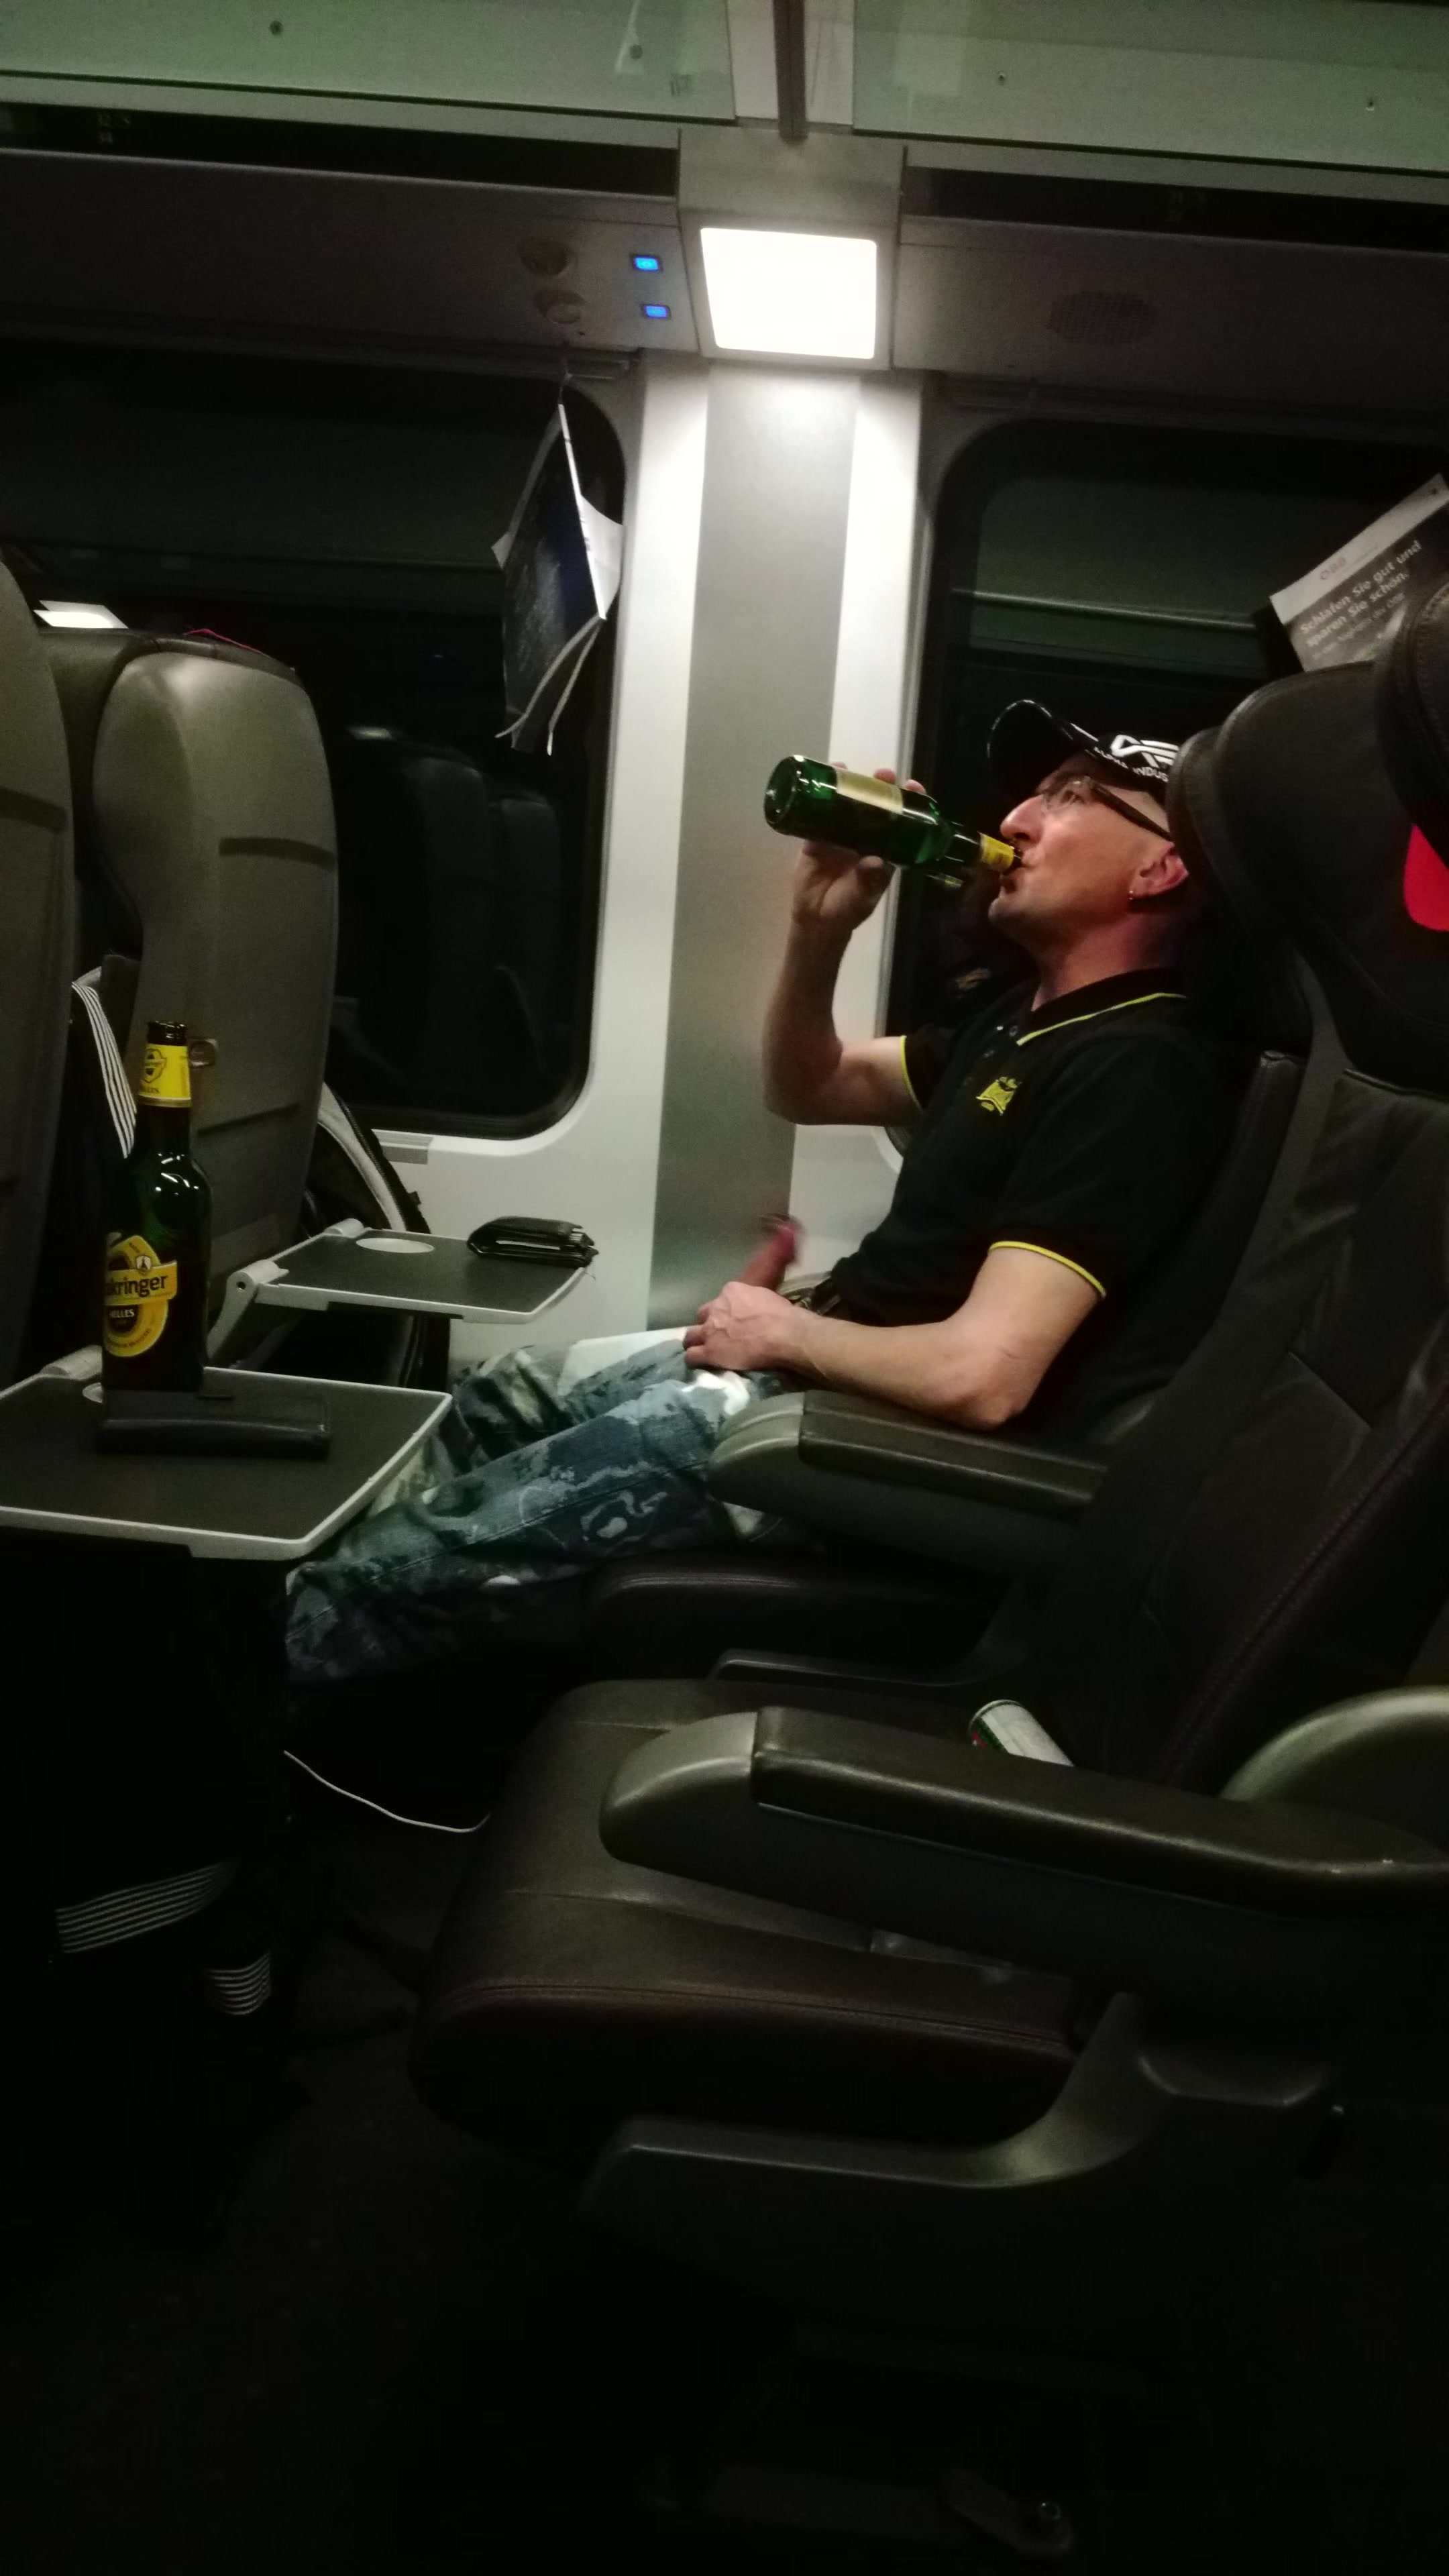 Short jerk in the first class of a train